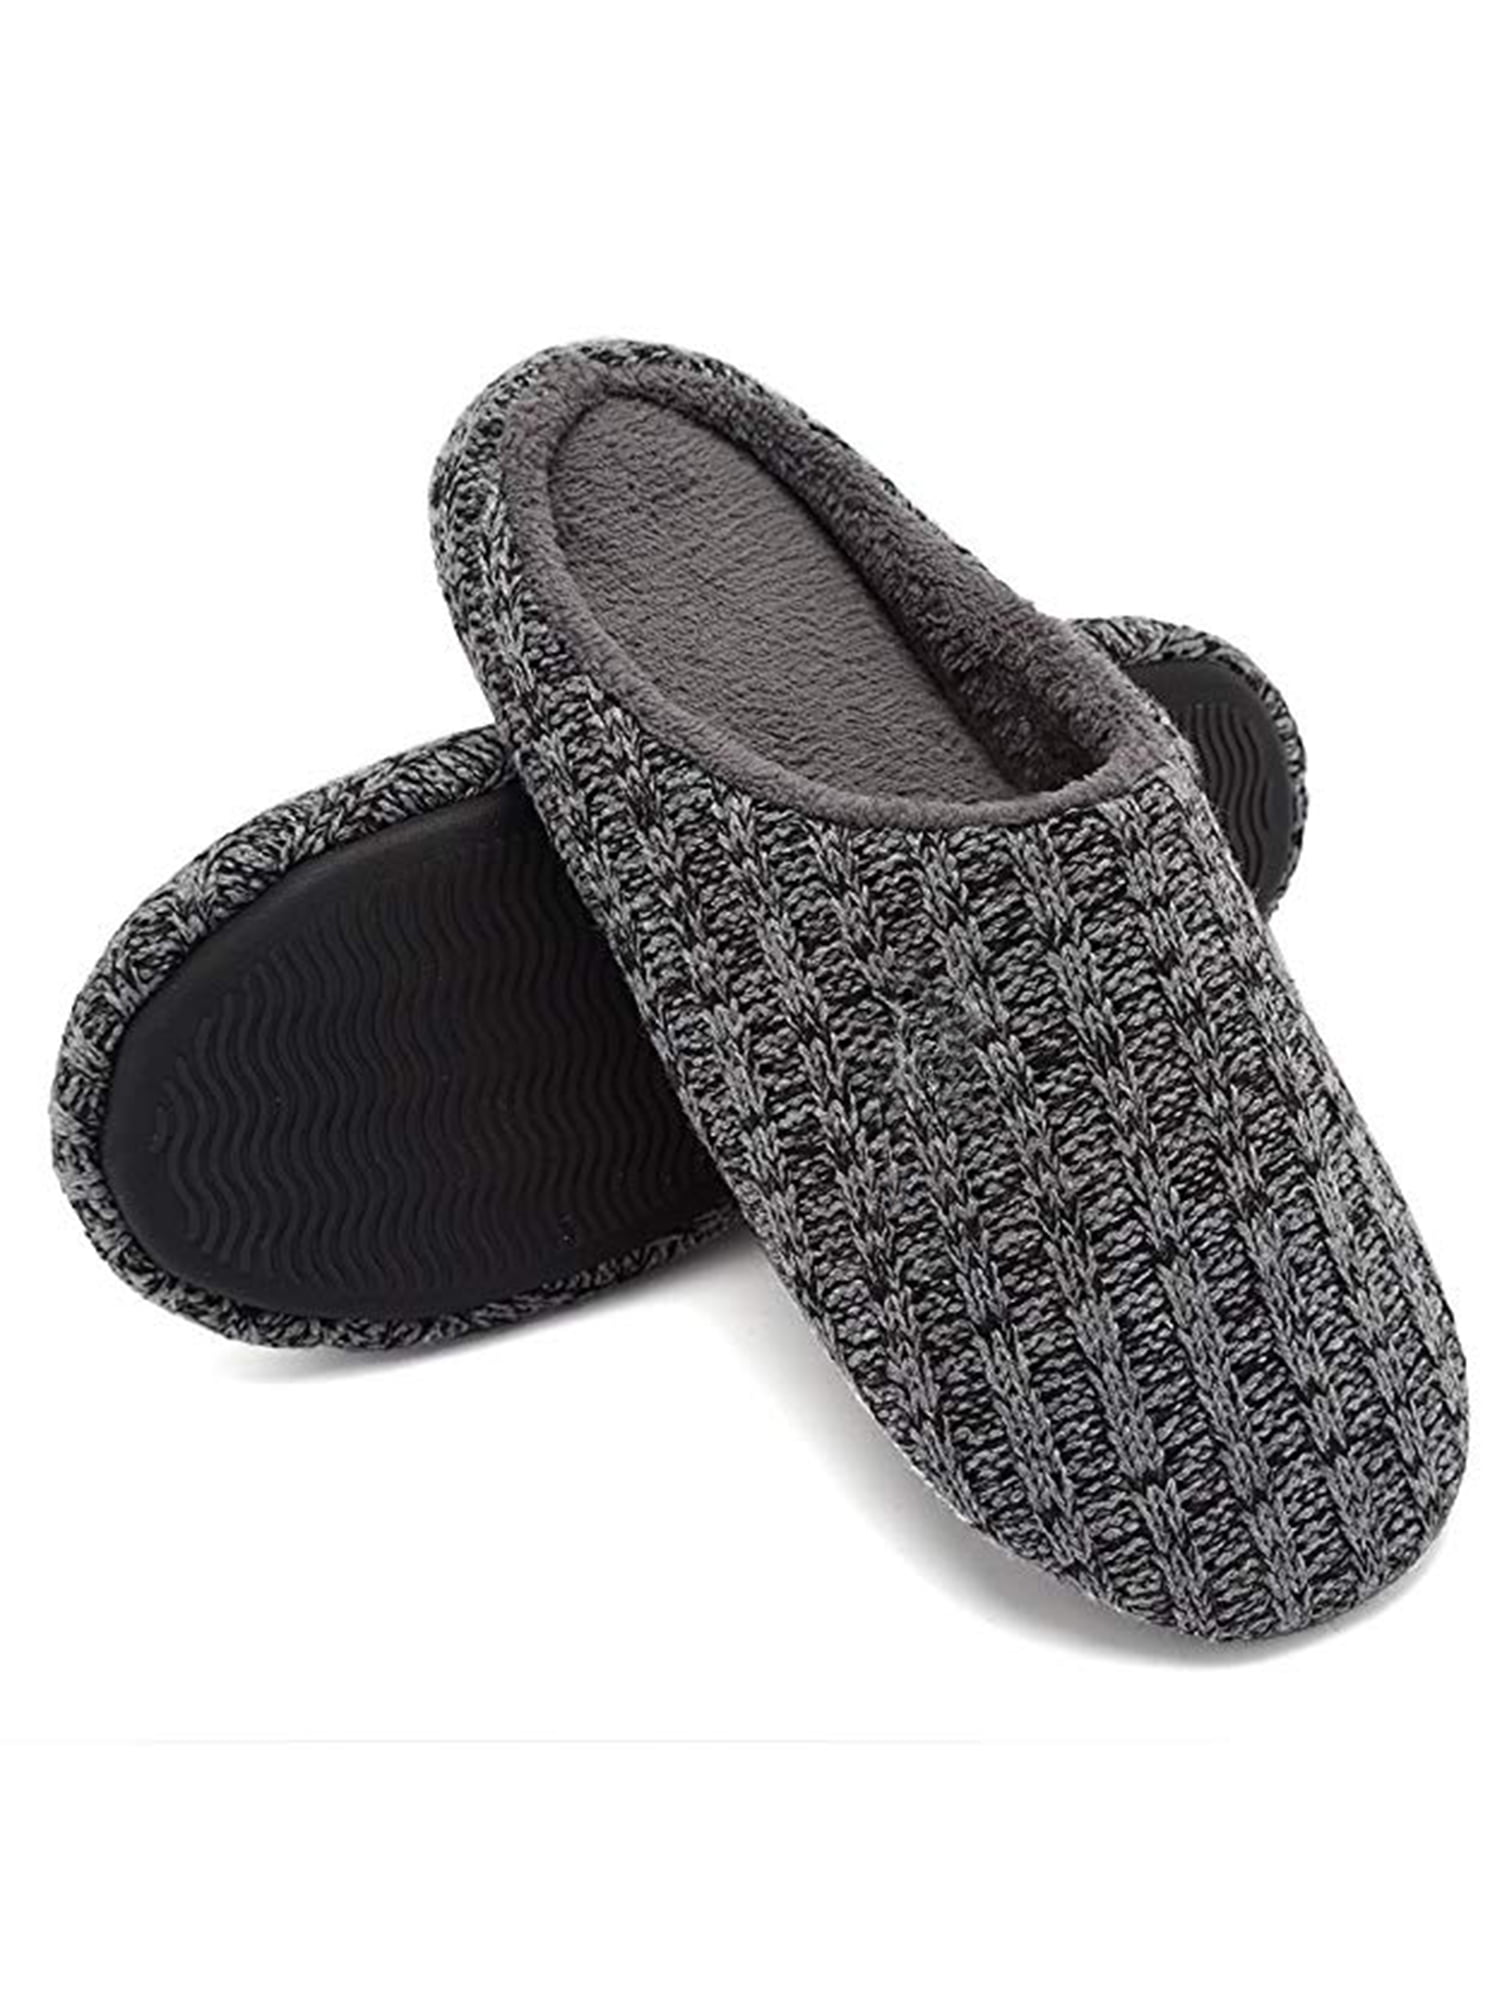 house shoes slippers womens